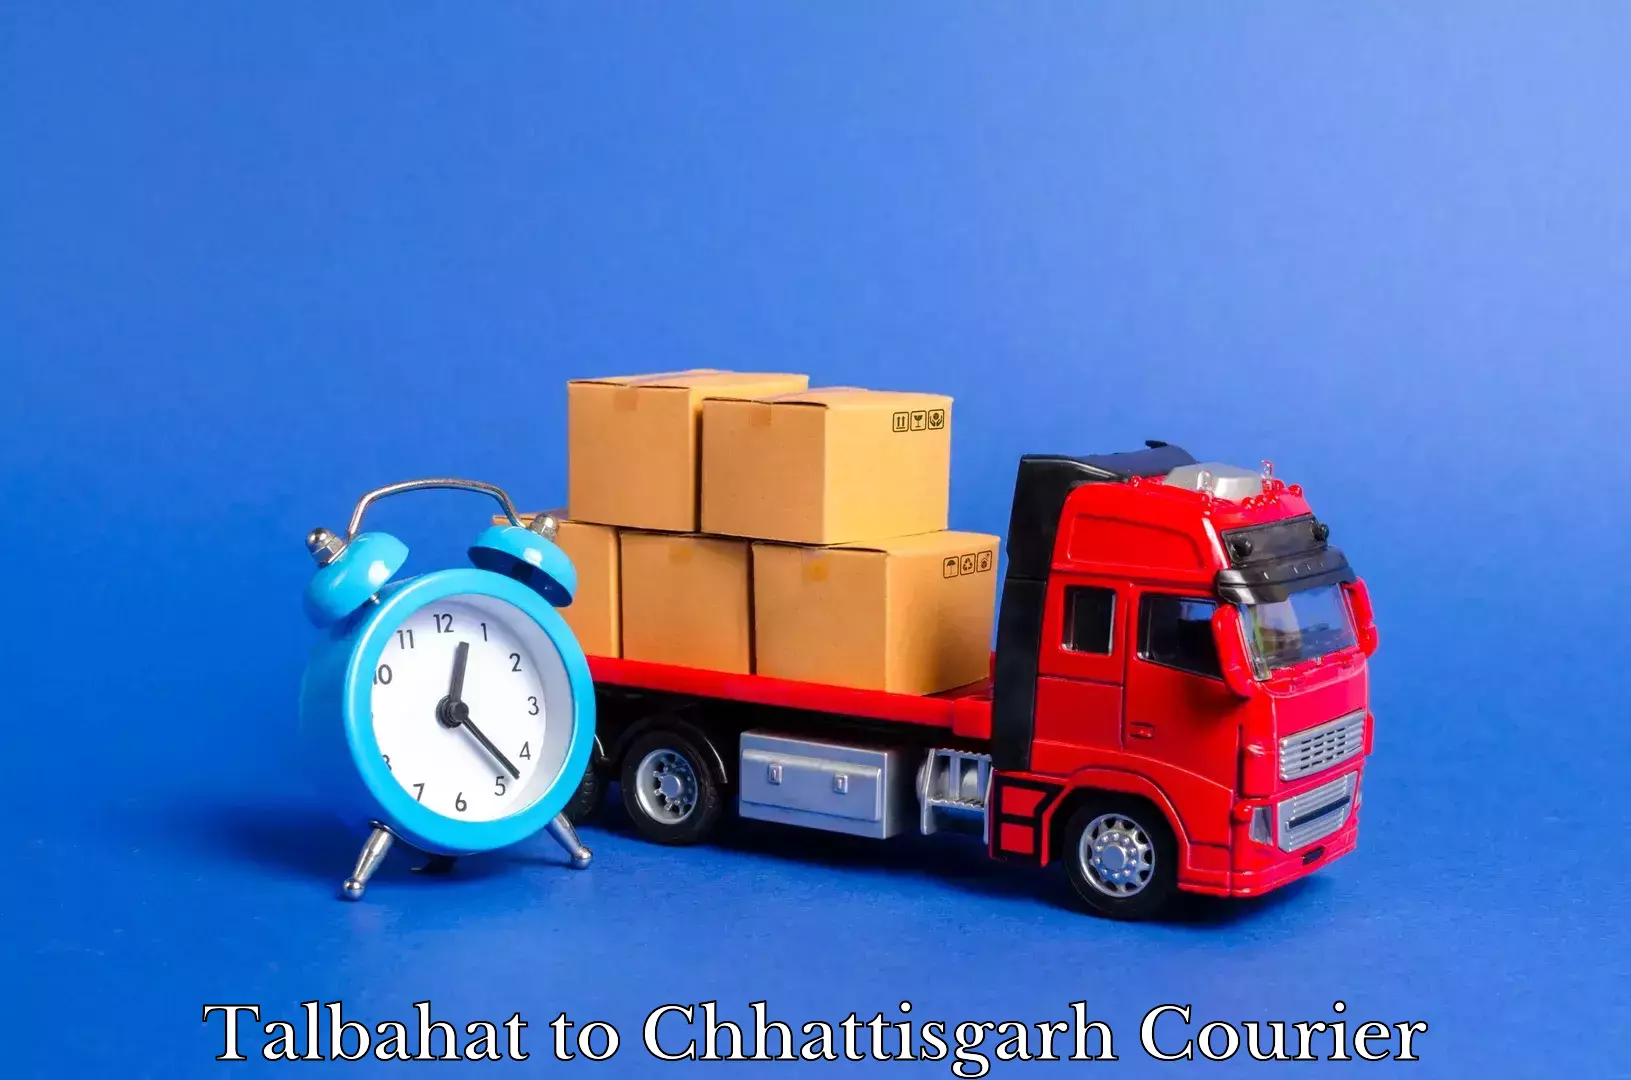 Furniture moving service Talbahat to Raigarh